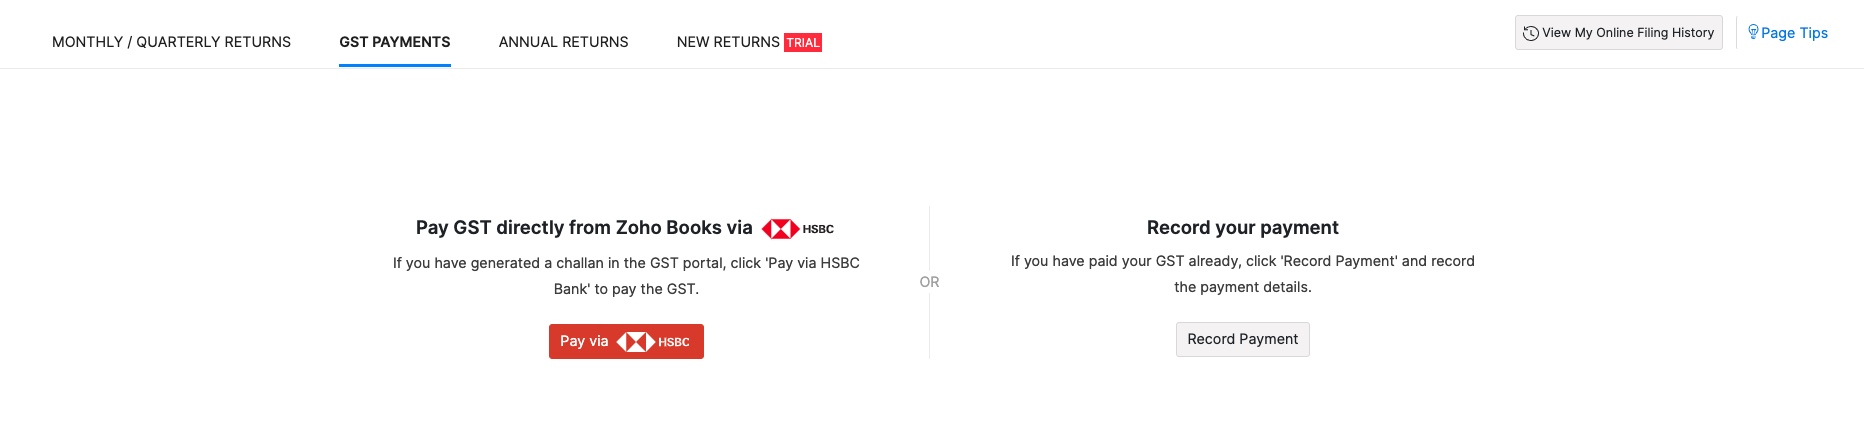 Banking of online hsbc pending transactions date Frequently Asked